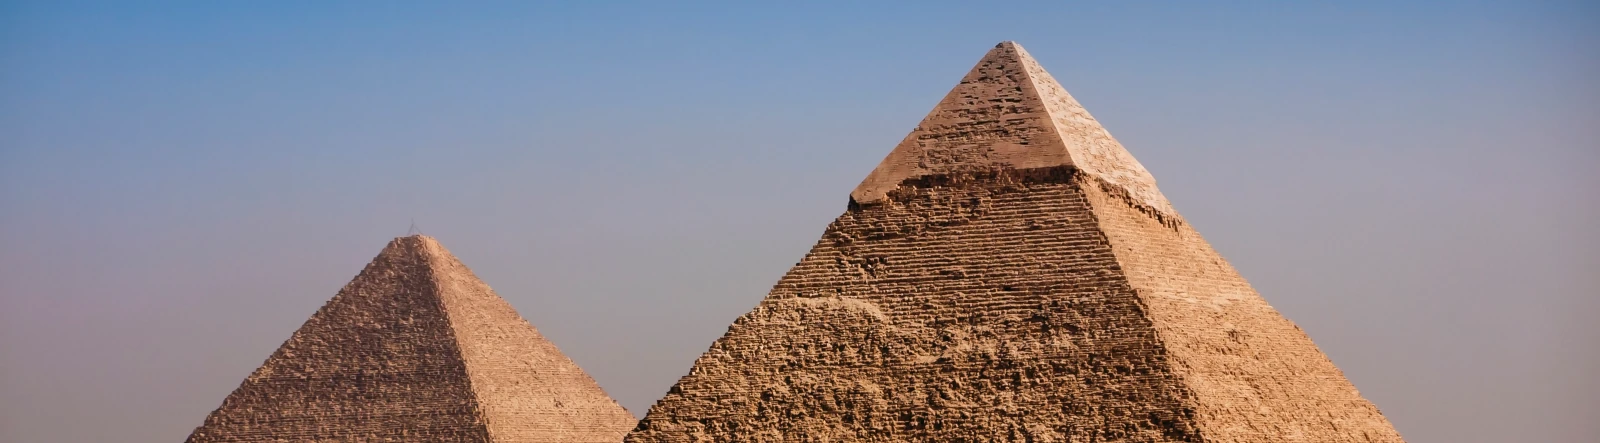 2 pyramids with blue sky in the background